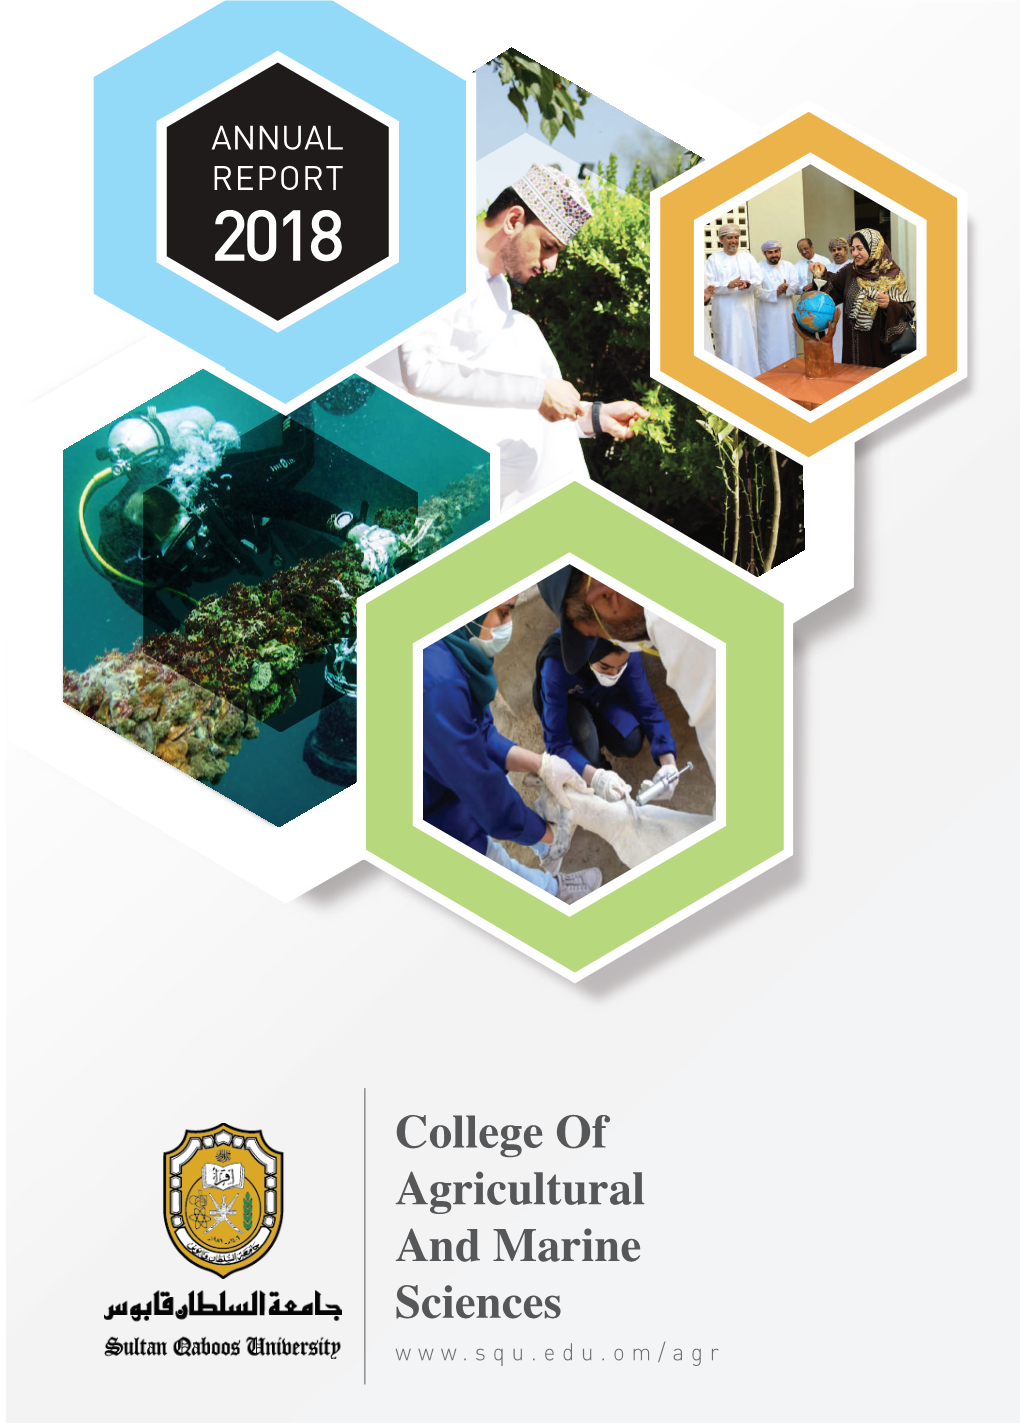 College of Agricultural and Marine Sciences